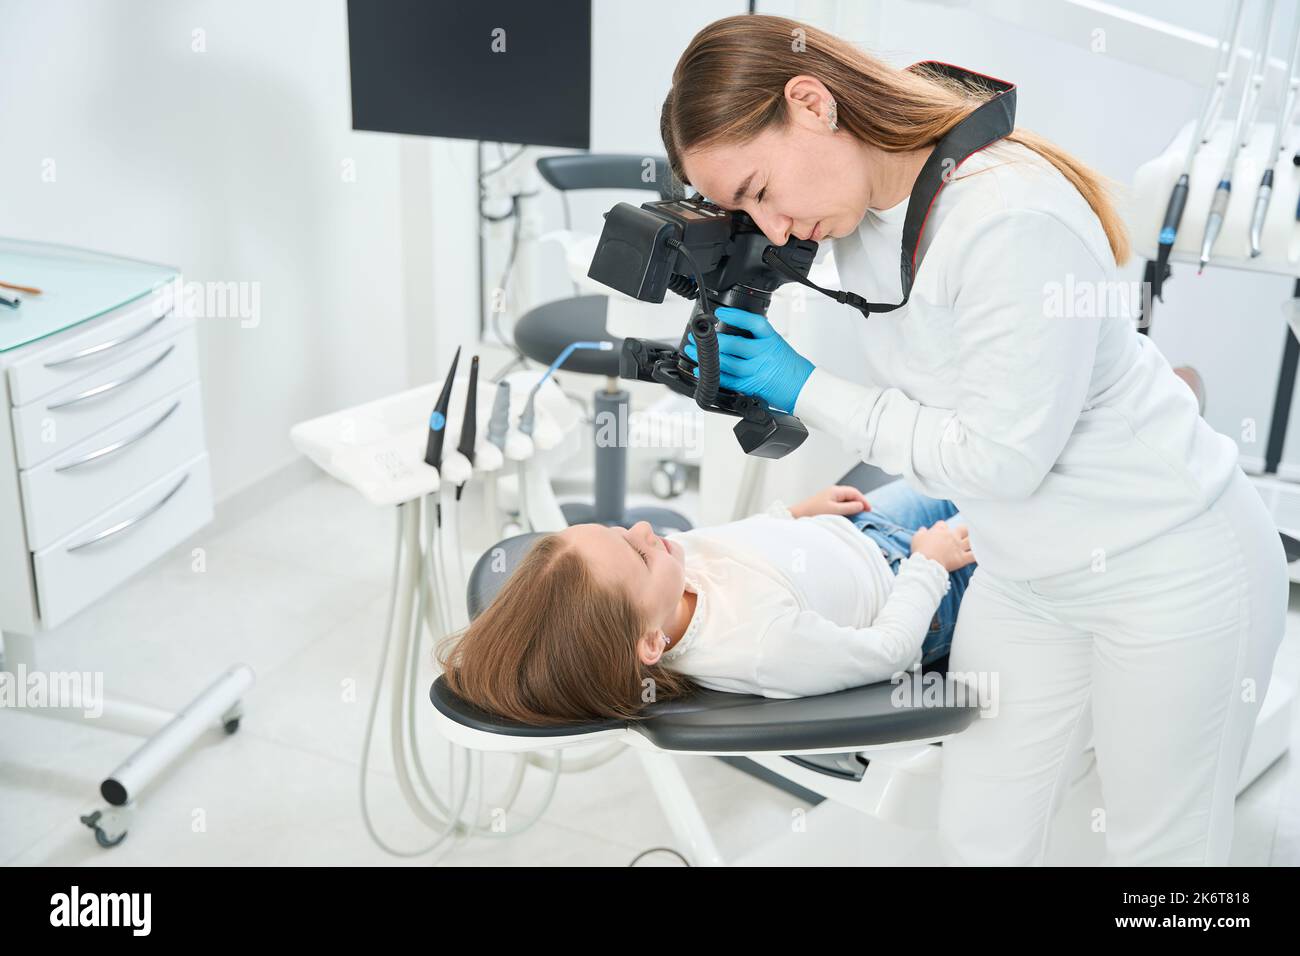 Pediatric dentist taking images of child mouth during consultation Stock Photo